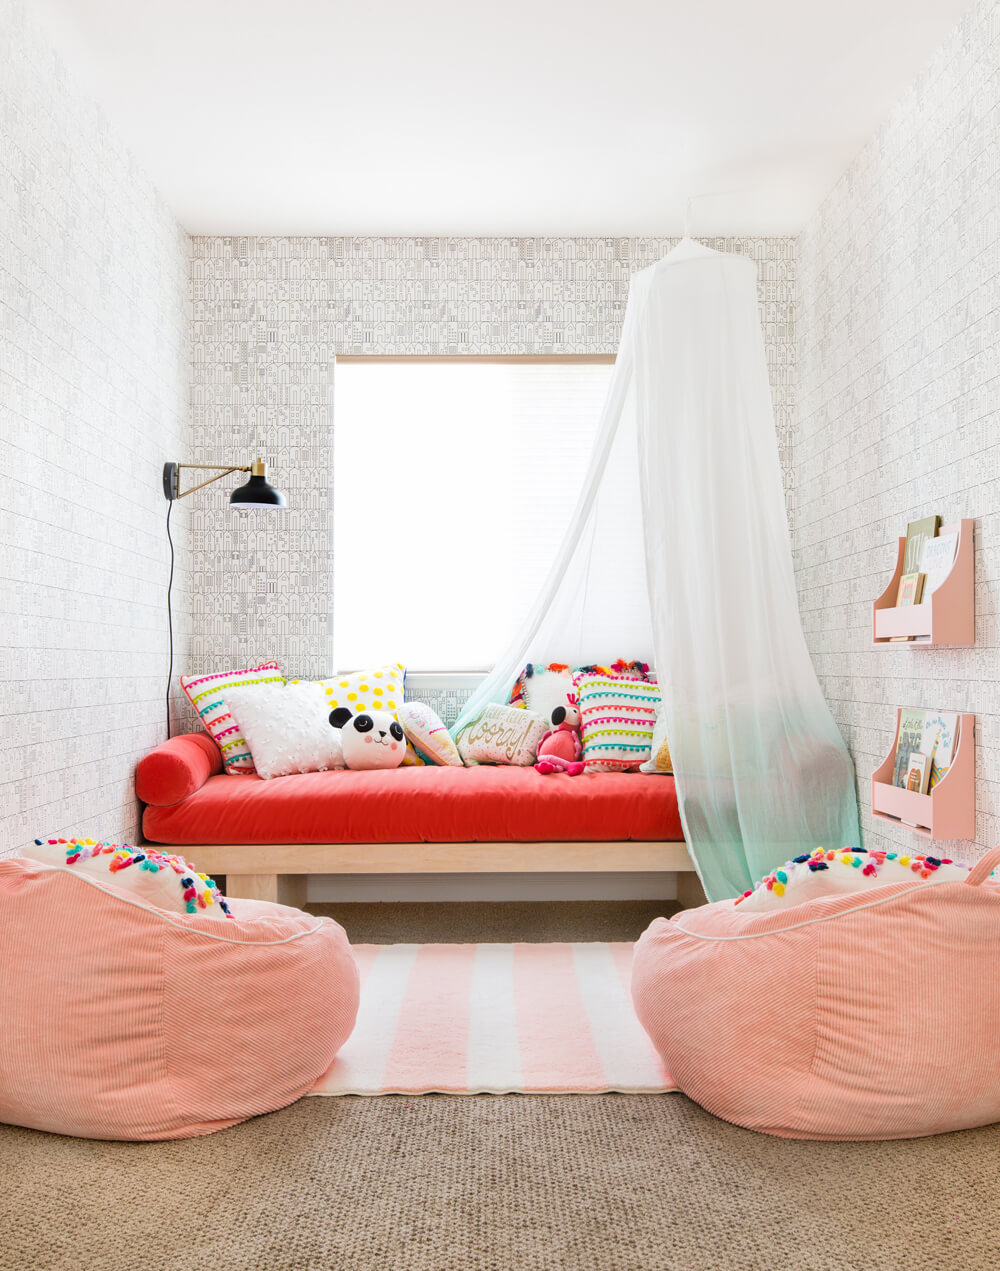 You're Going to Love These 11 Pink and Red Interiors